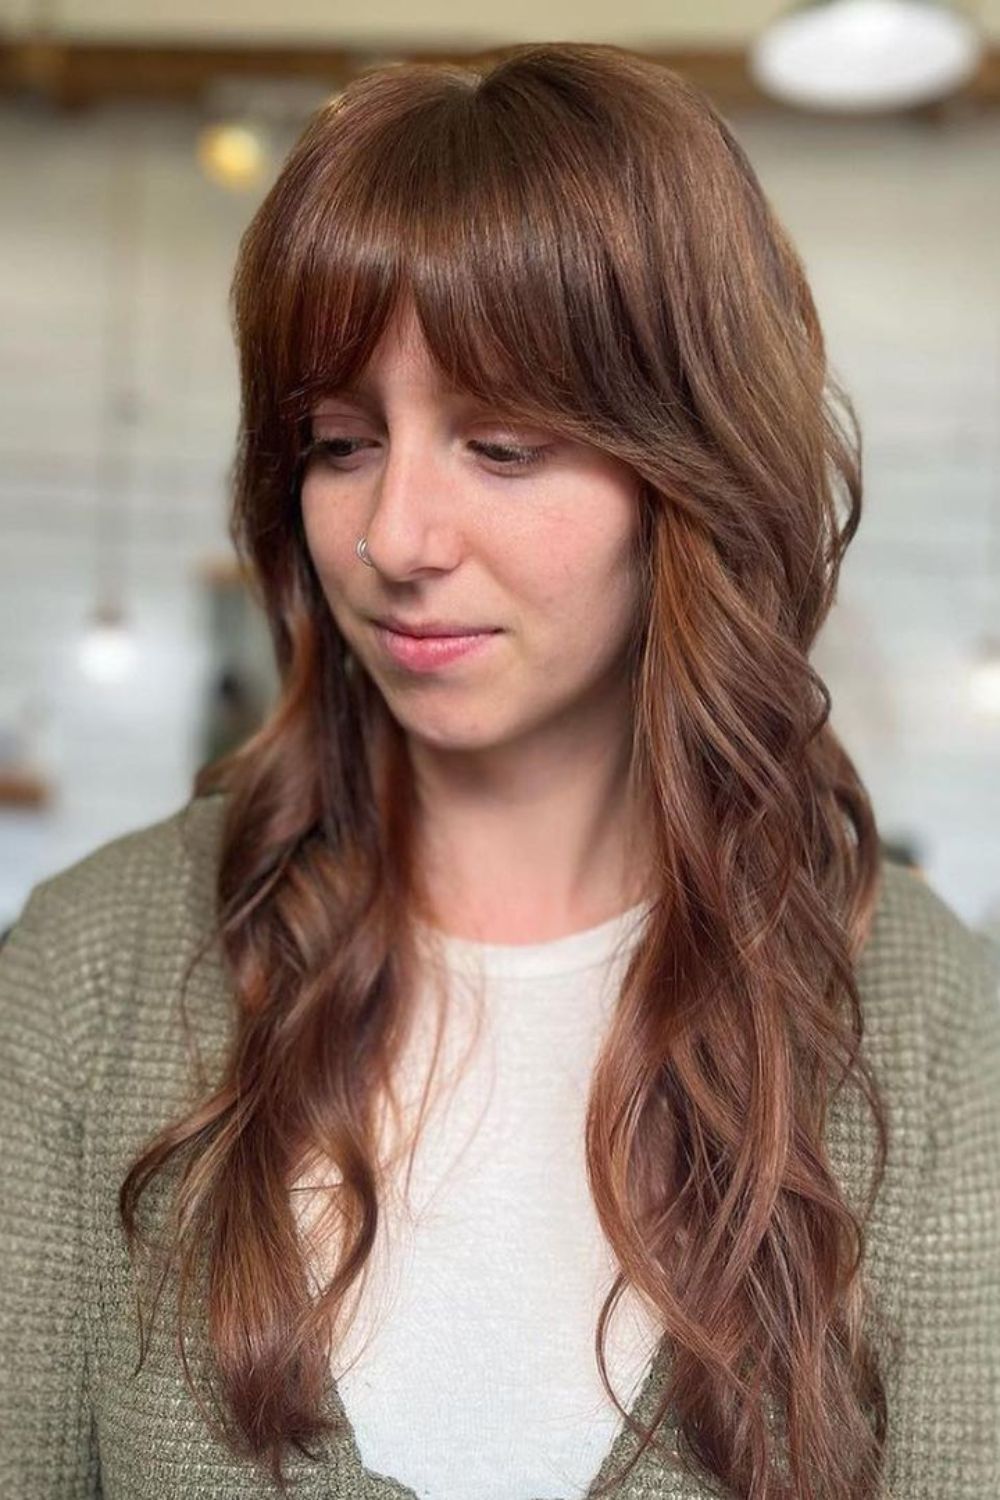 A woman with long brown wavy hair with closed curtain bangs.